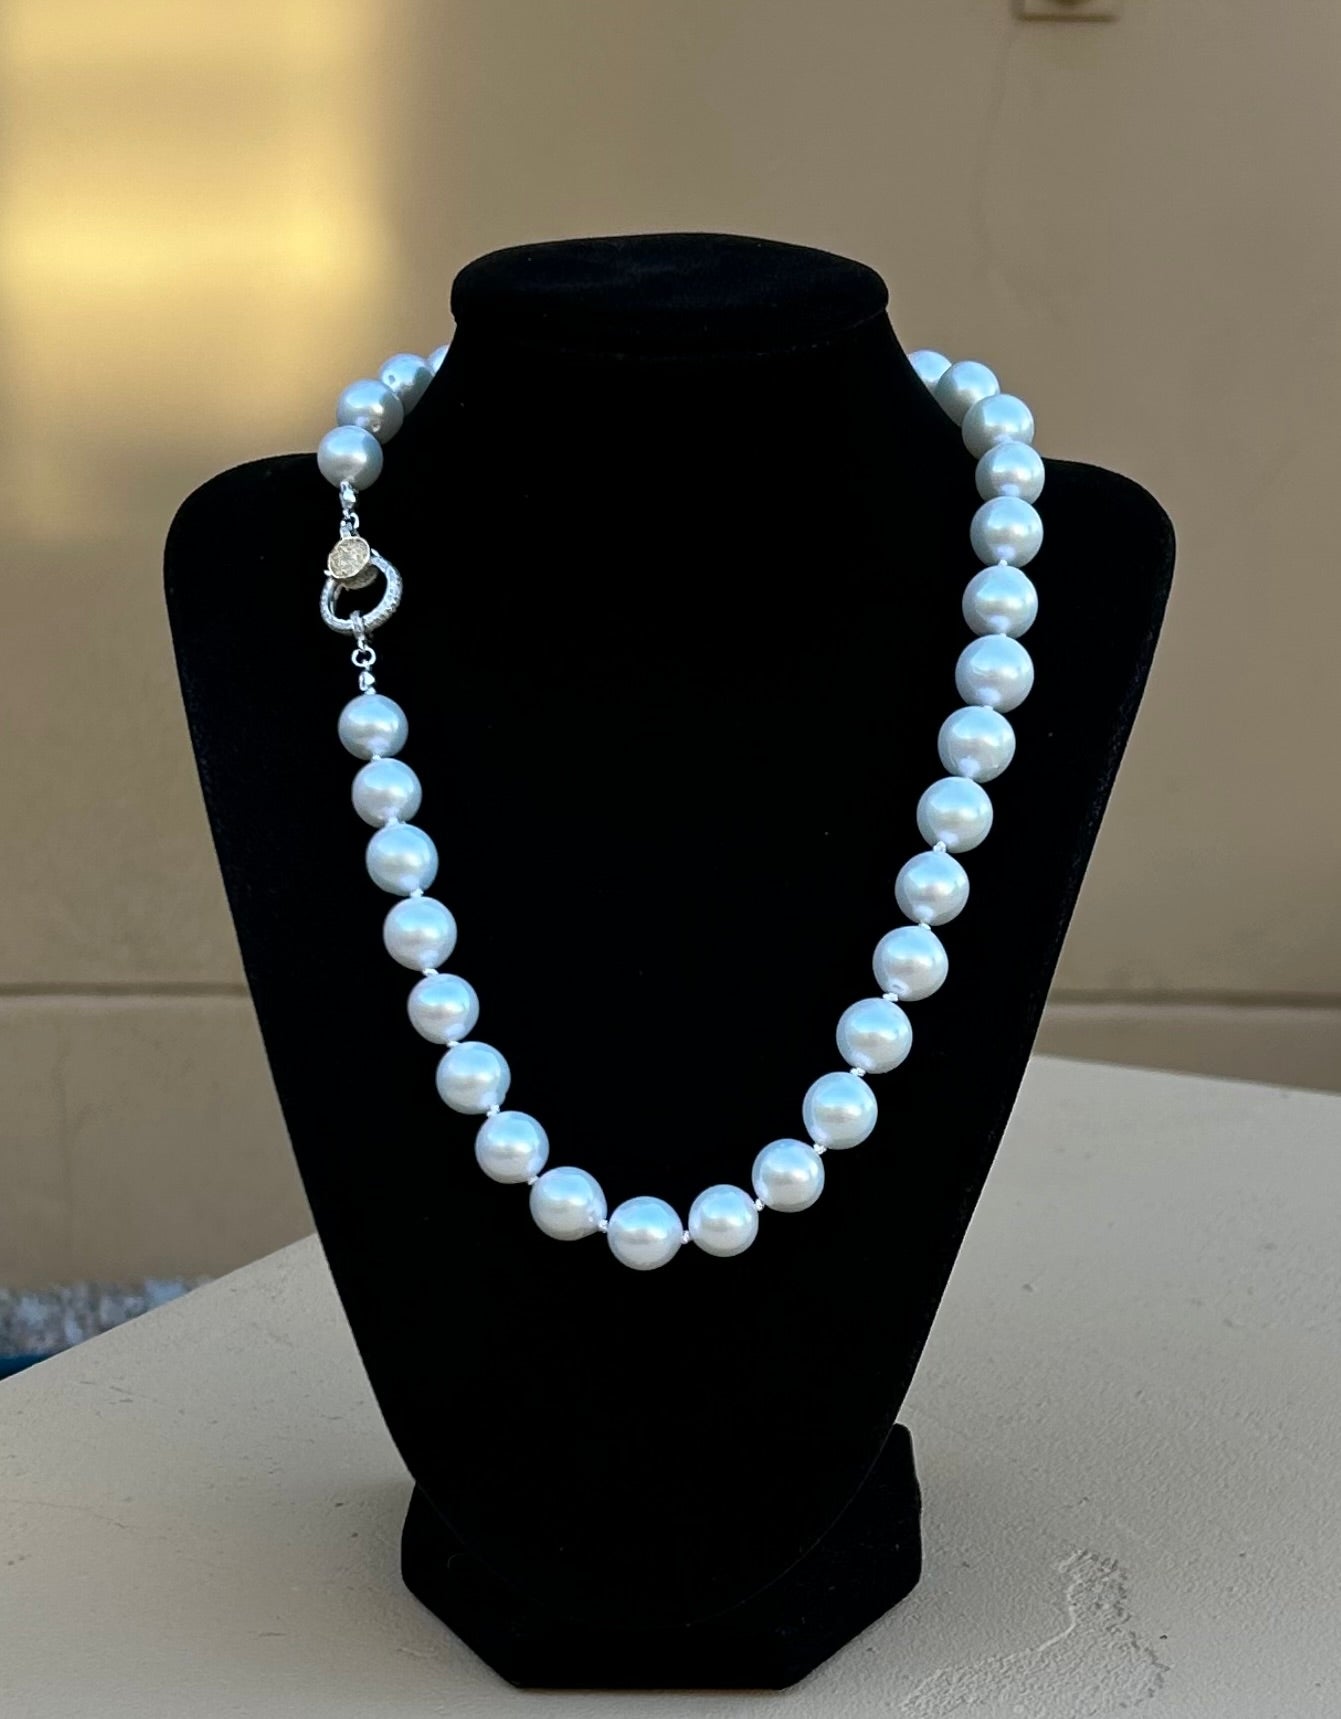 Necklace - Large white knotted pearls with a diamond pave clasp